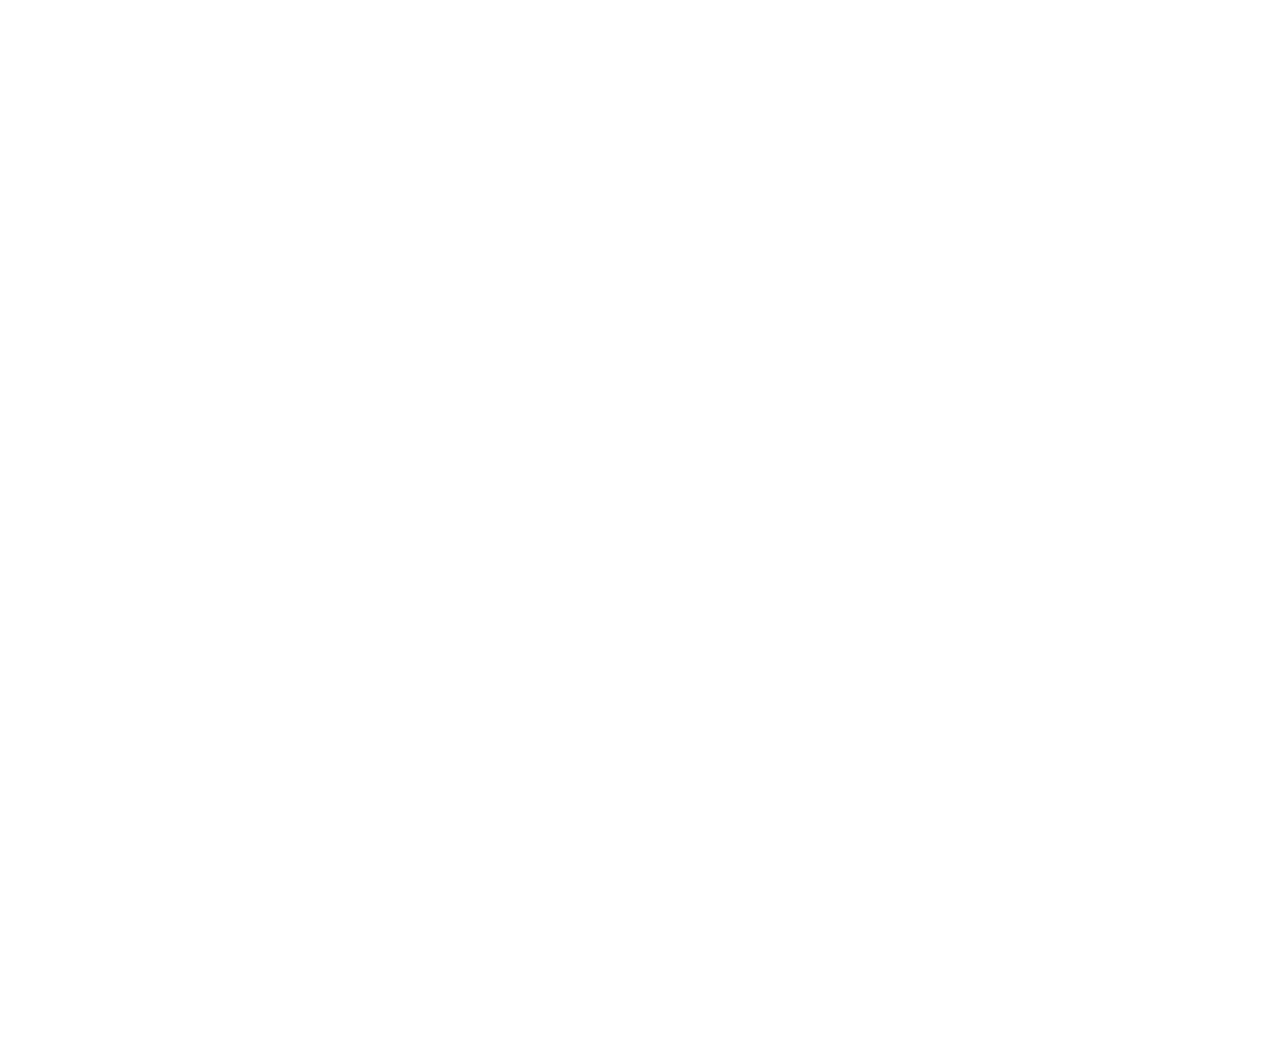 LorenzWalter | Content | Communication | Consulting